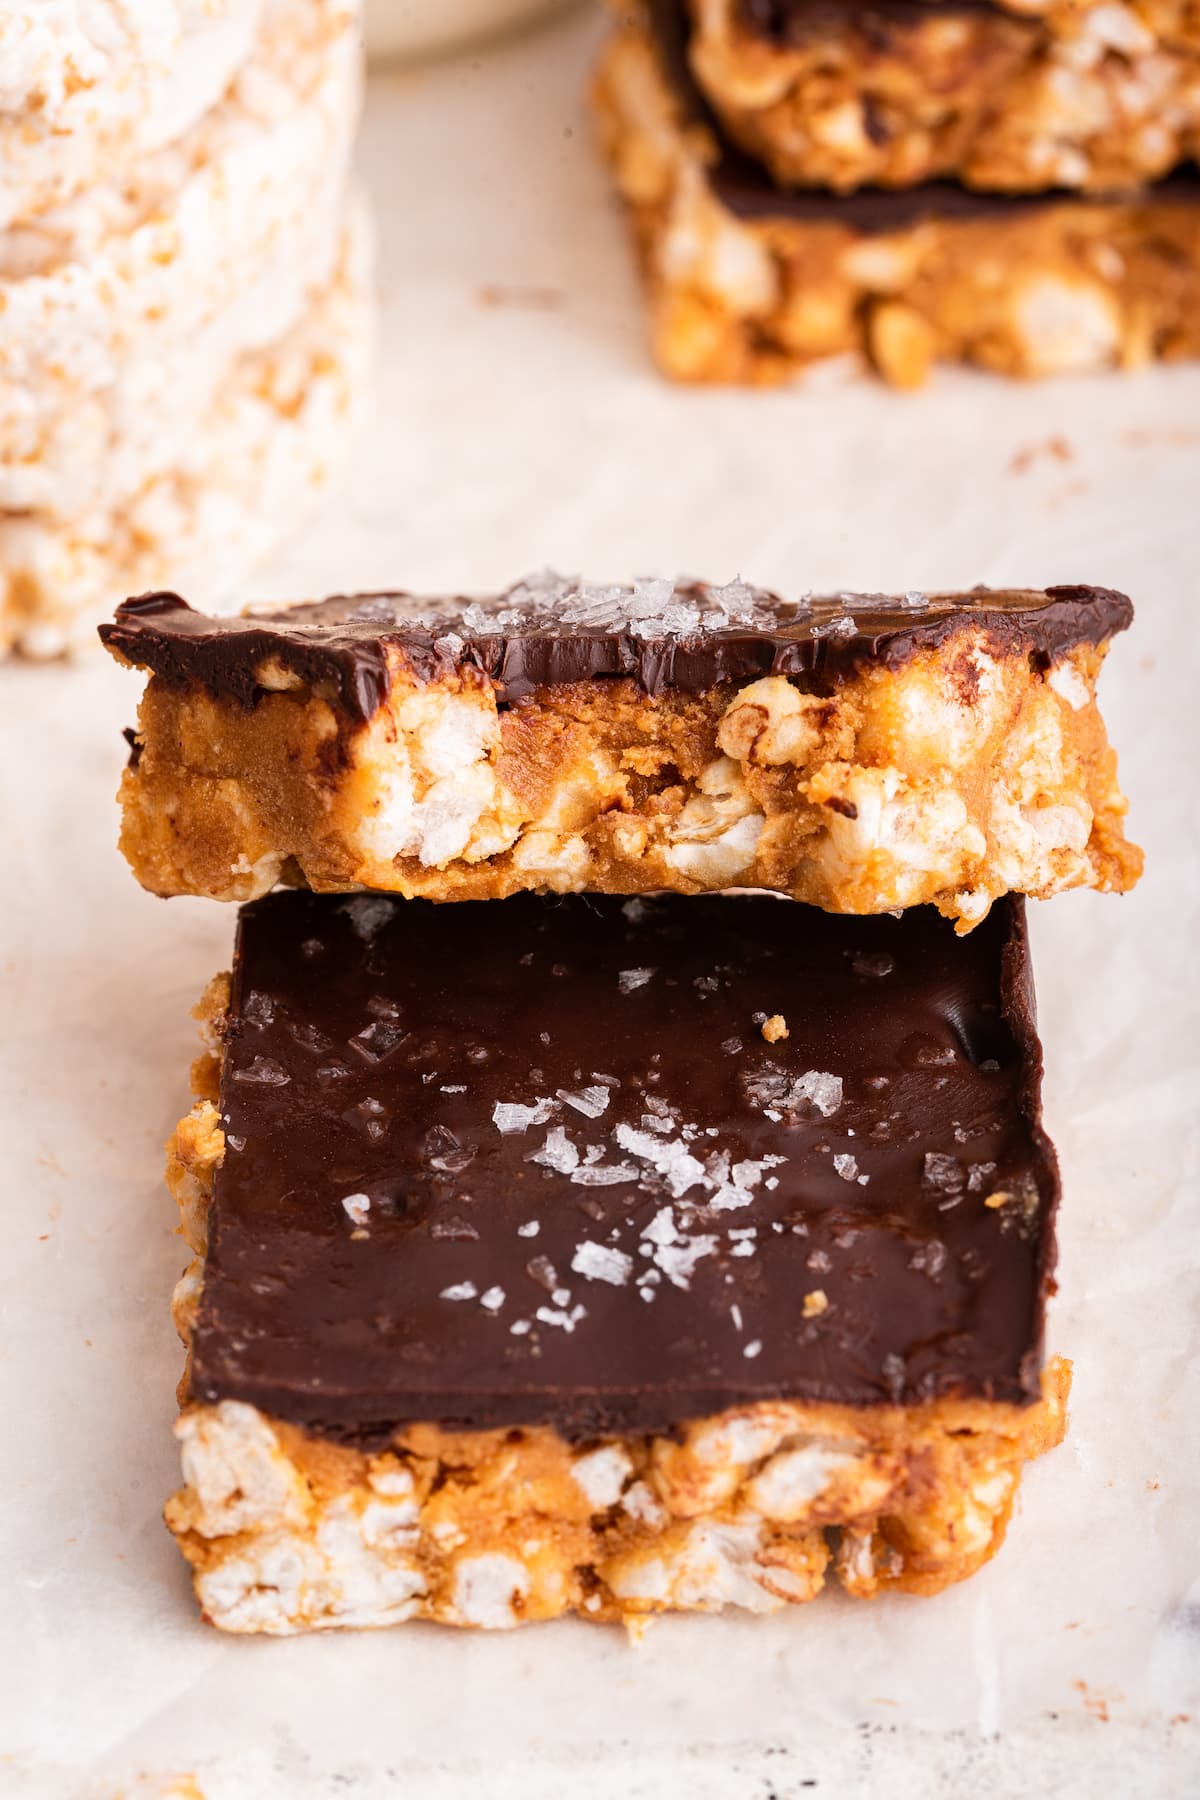 Two no bake peanut butter crunch bars stacked on one another with a bite taken from one.